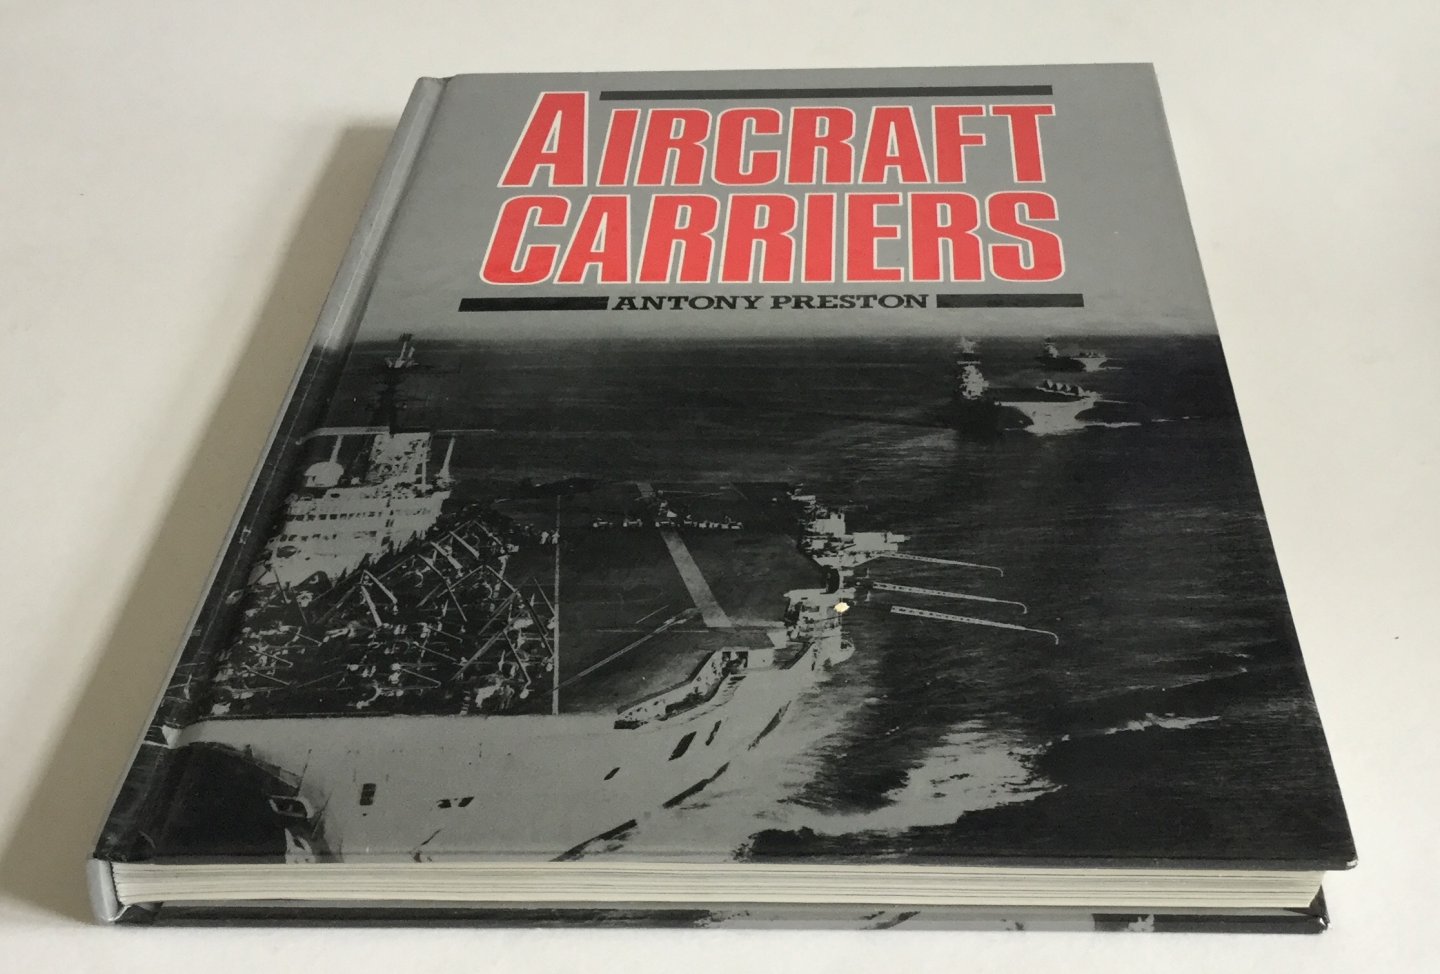 Preston, Anthony - Aircraft carriers